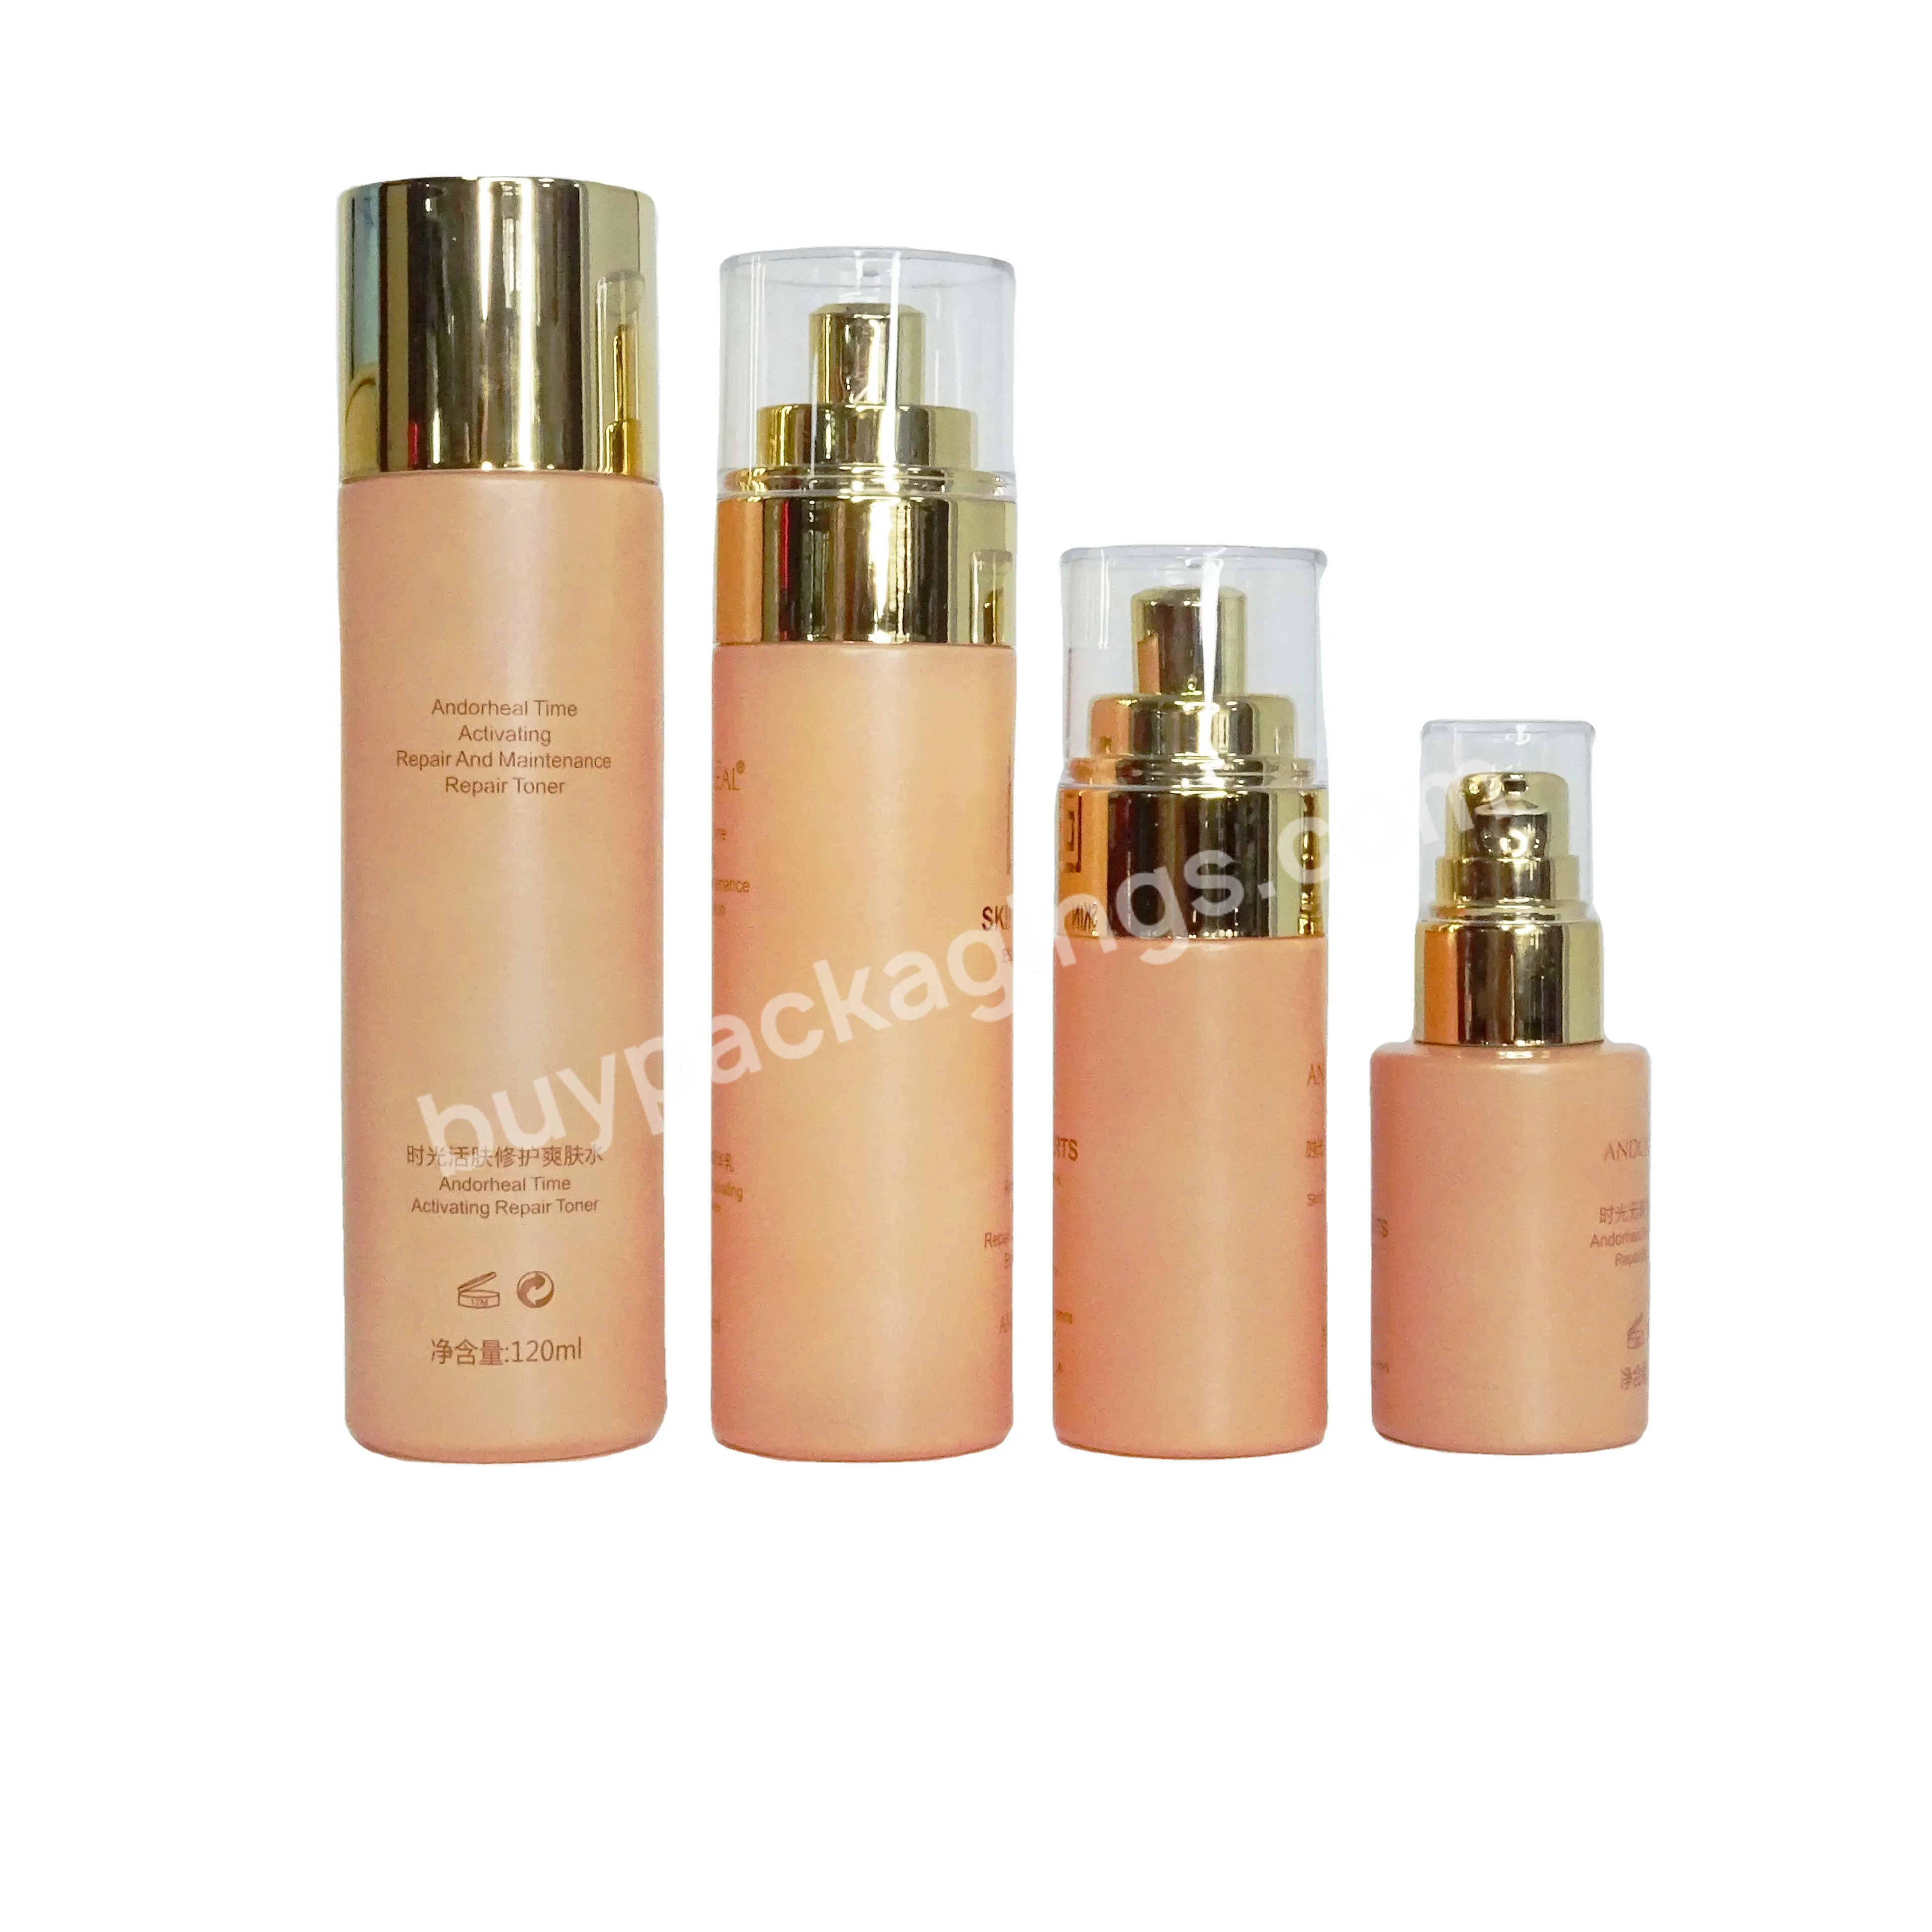 Luxury Skincare Packaging Yellow Nude Gold Set Skin Care Packaging Cosmetic Container Bottle And Jar - Buy Cosmetic Bottle Set,Skin Care Packaging Container,Luxury Skincare Packaging Rose Gold Set.